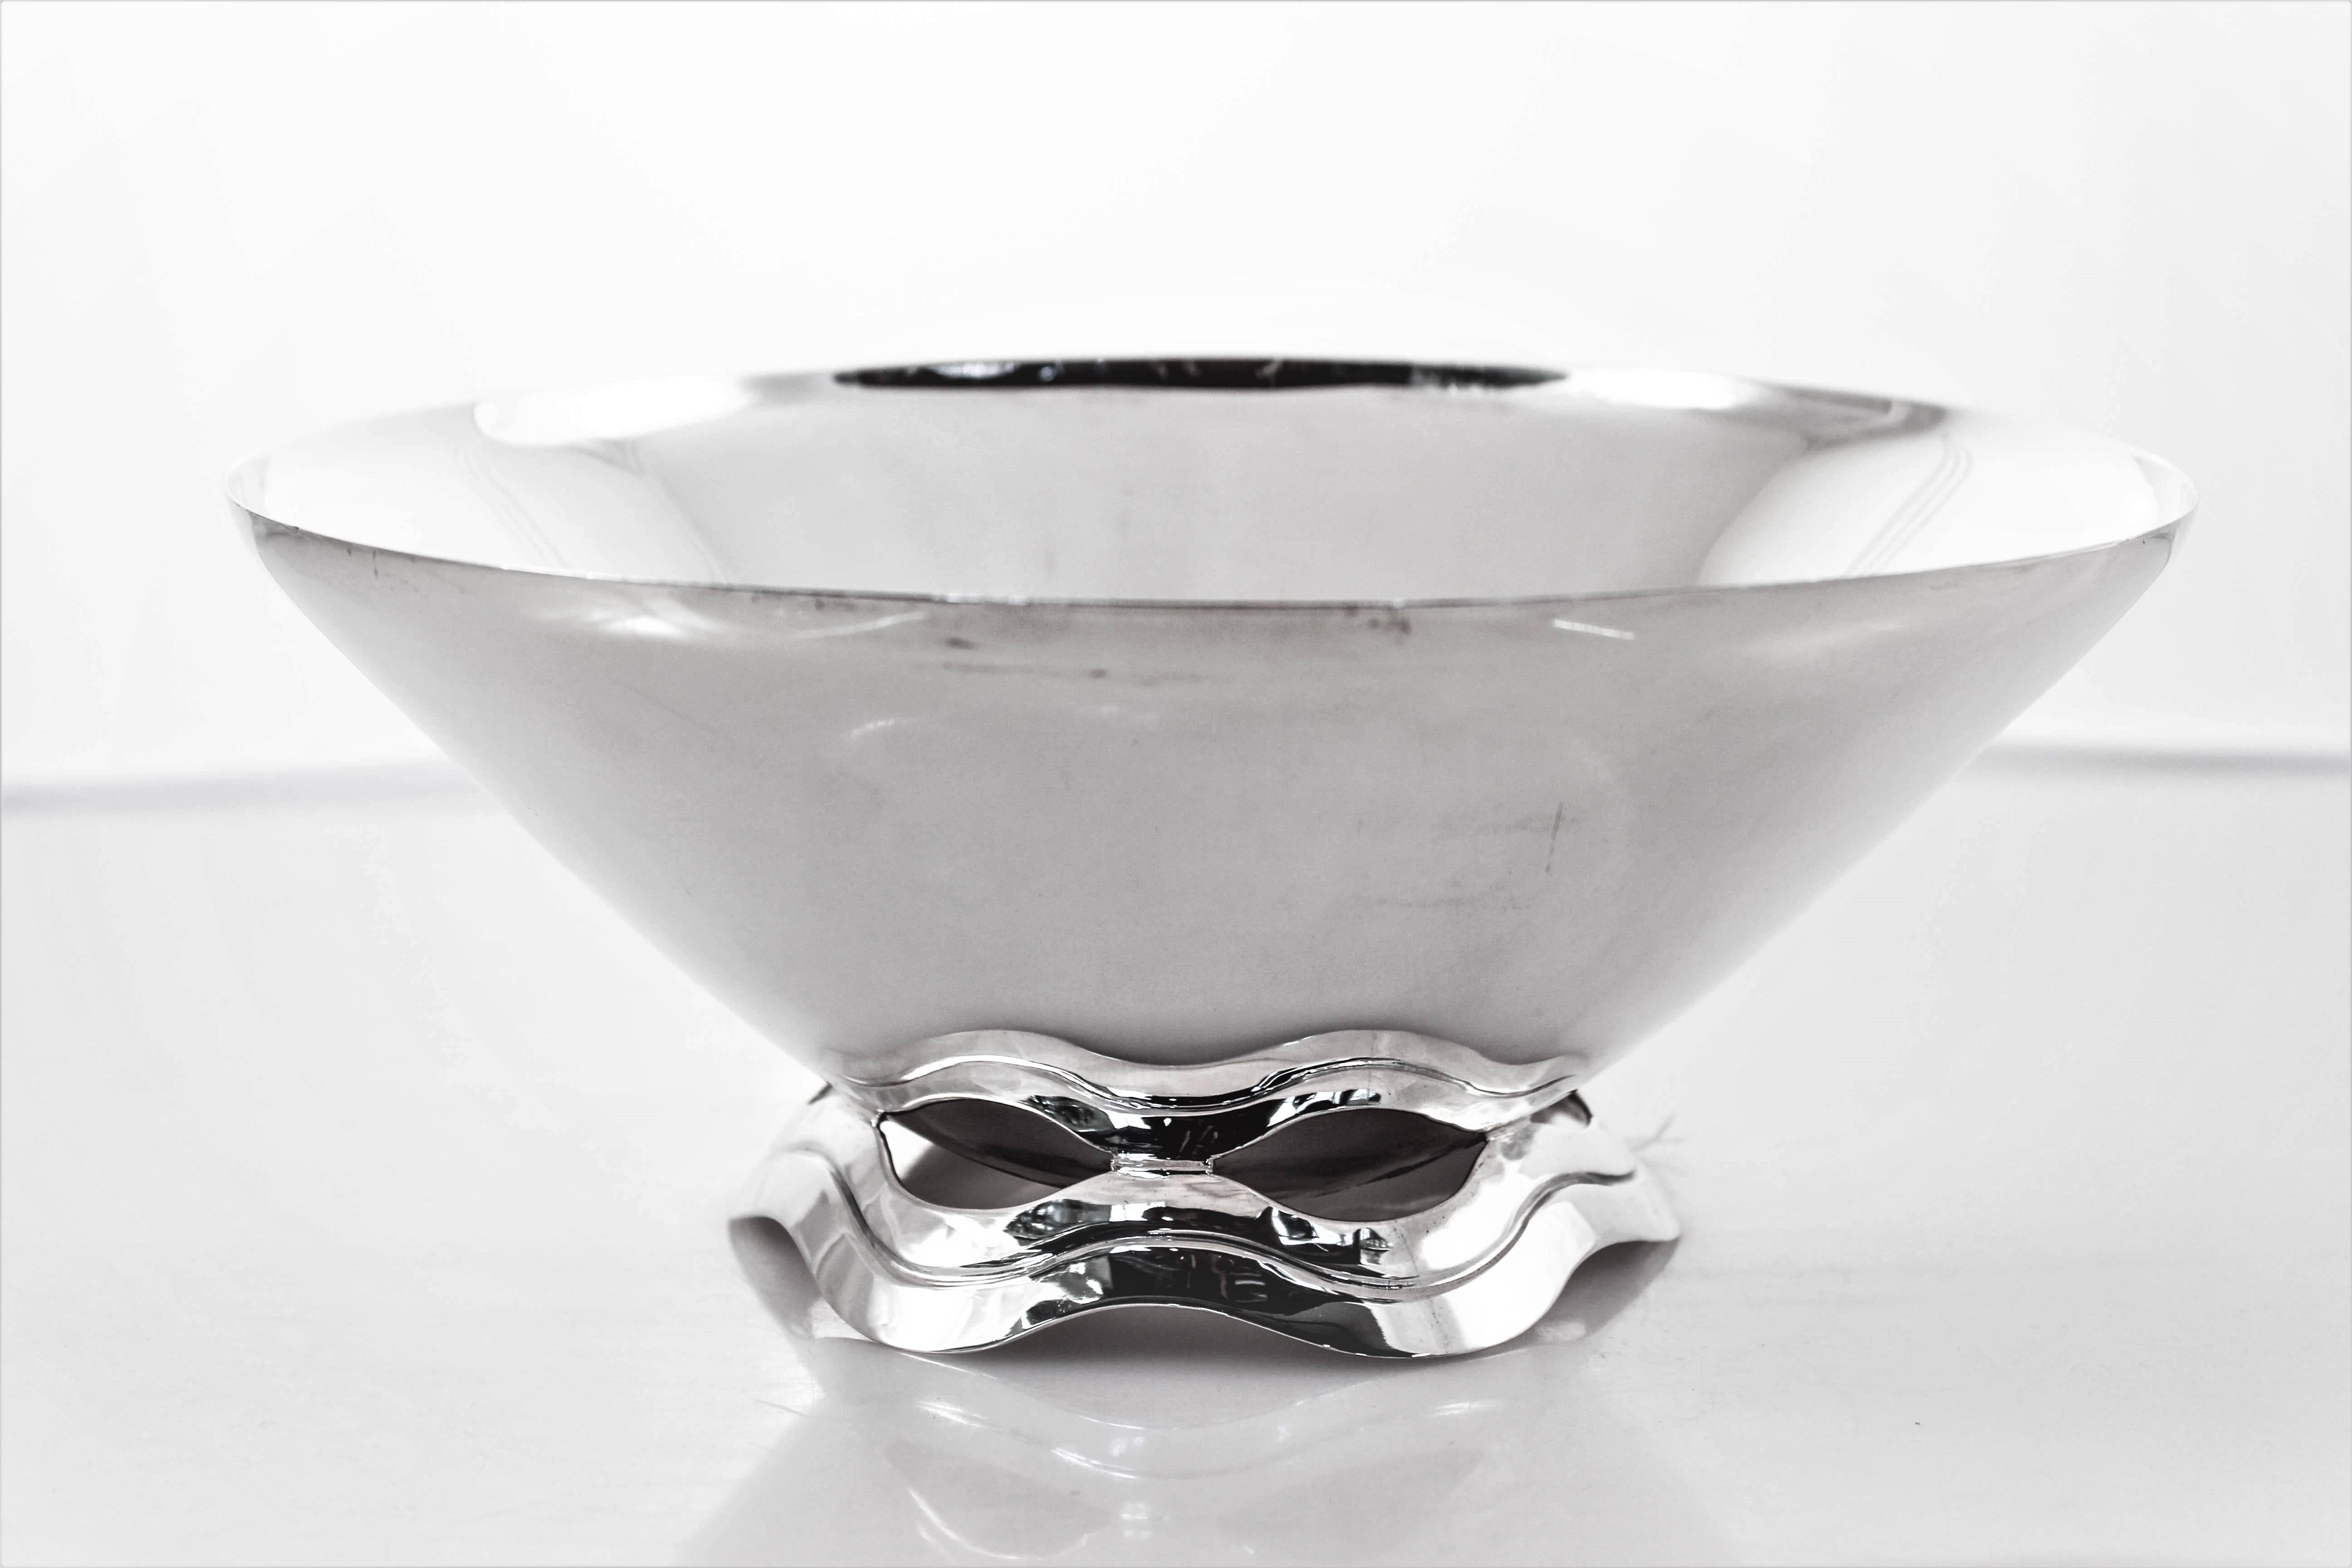 A great example of modernist silver hollowware. The bowl has a tapered shape while the base has a scalloped bottom and oval shaped cutouts. Similar to a Tiffany & Co piece that was manufactured around the same period. Lovely filled with fruit or